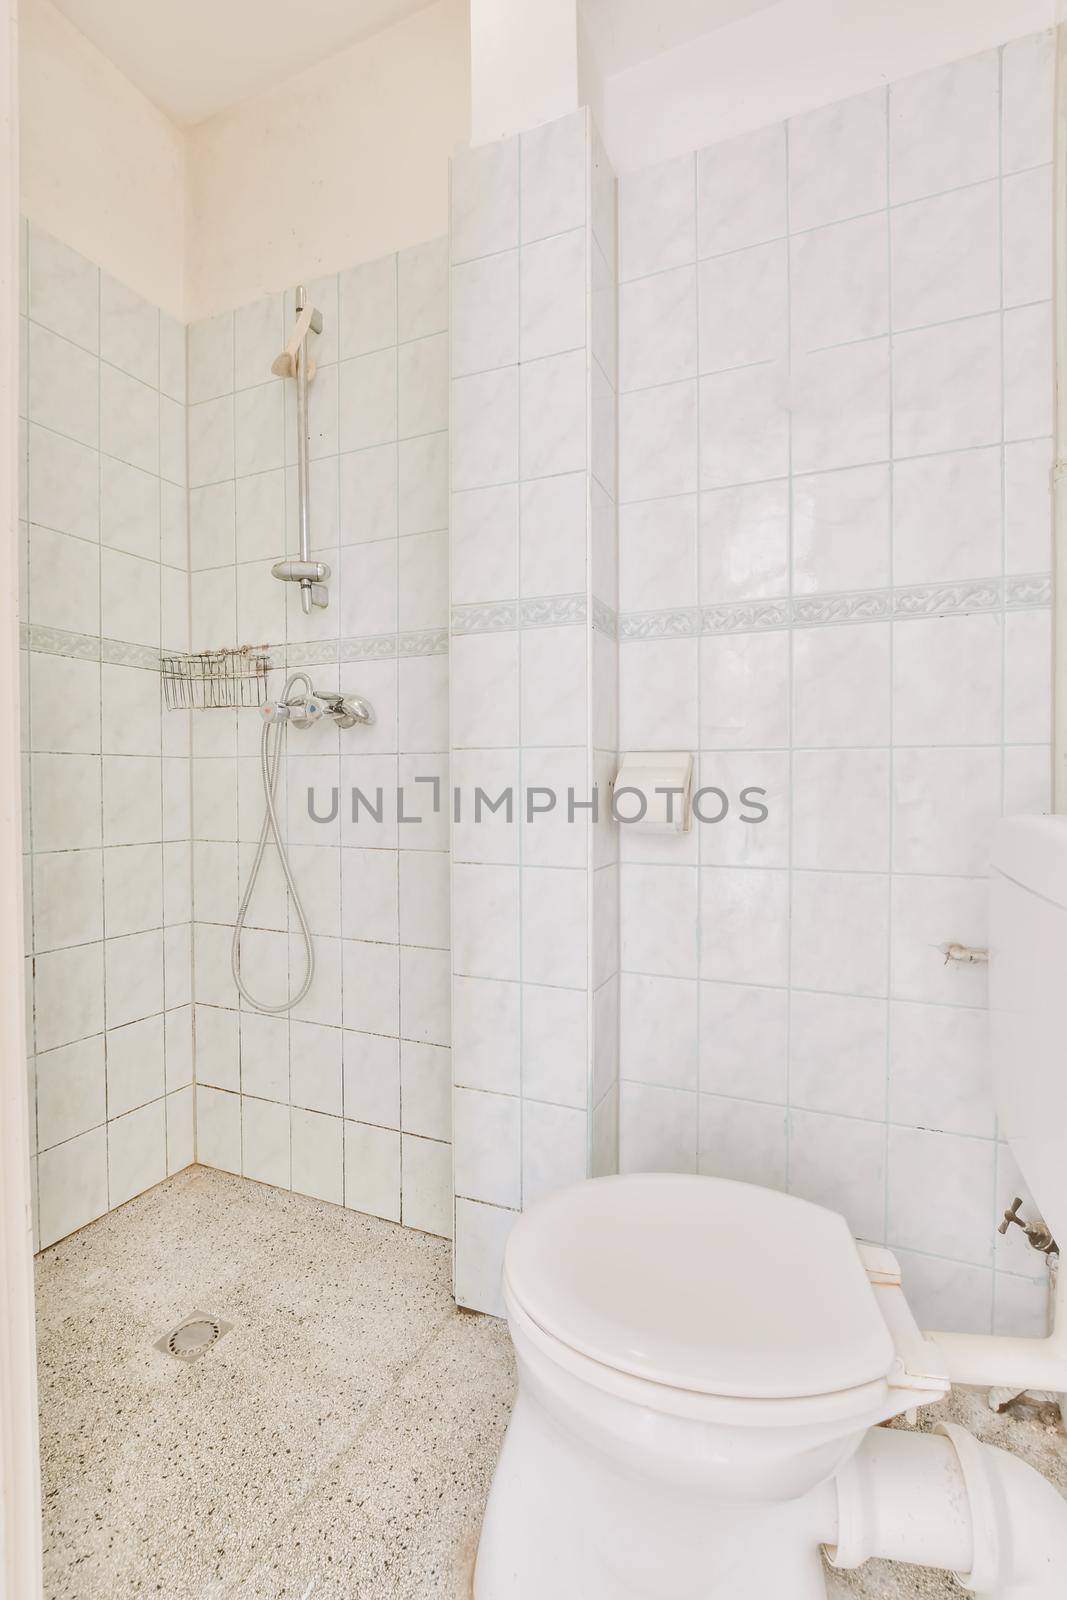 Interior of bathroom with toilet and shower